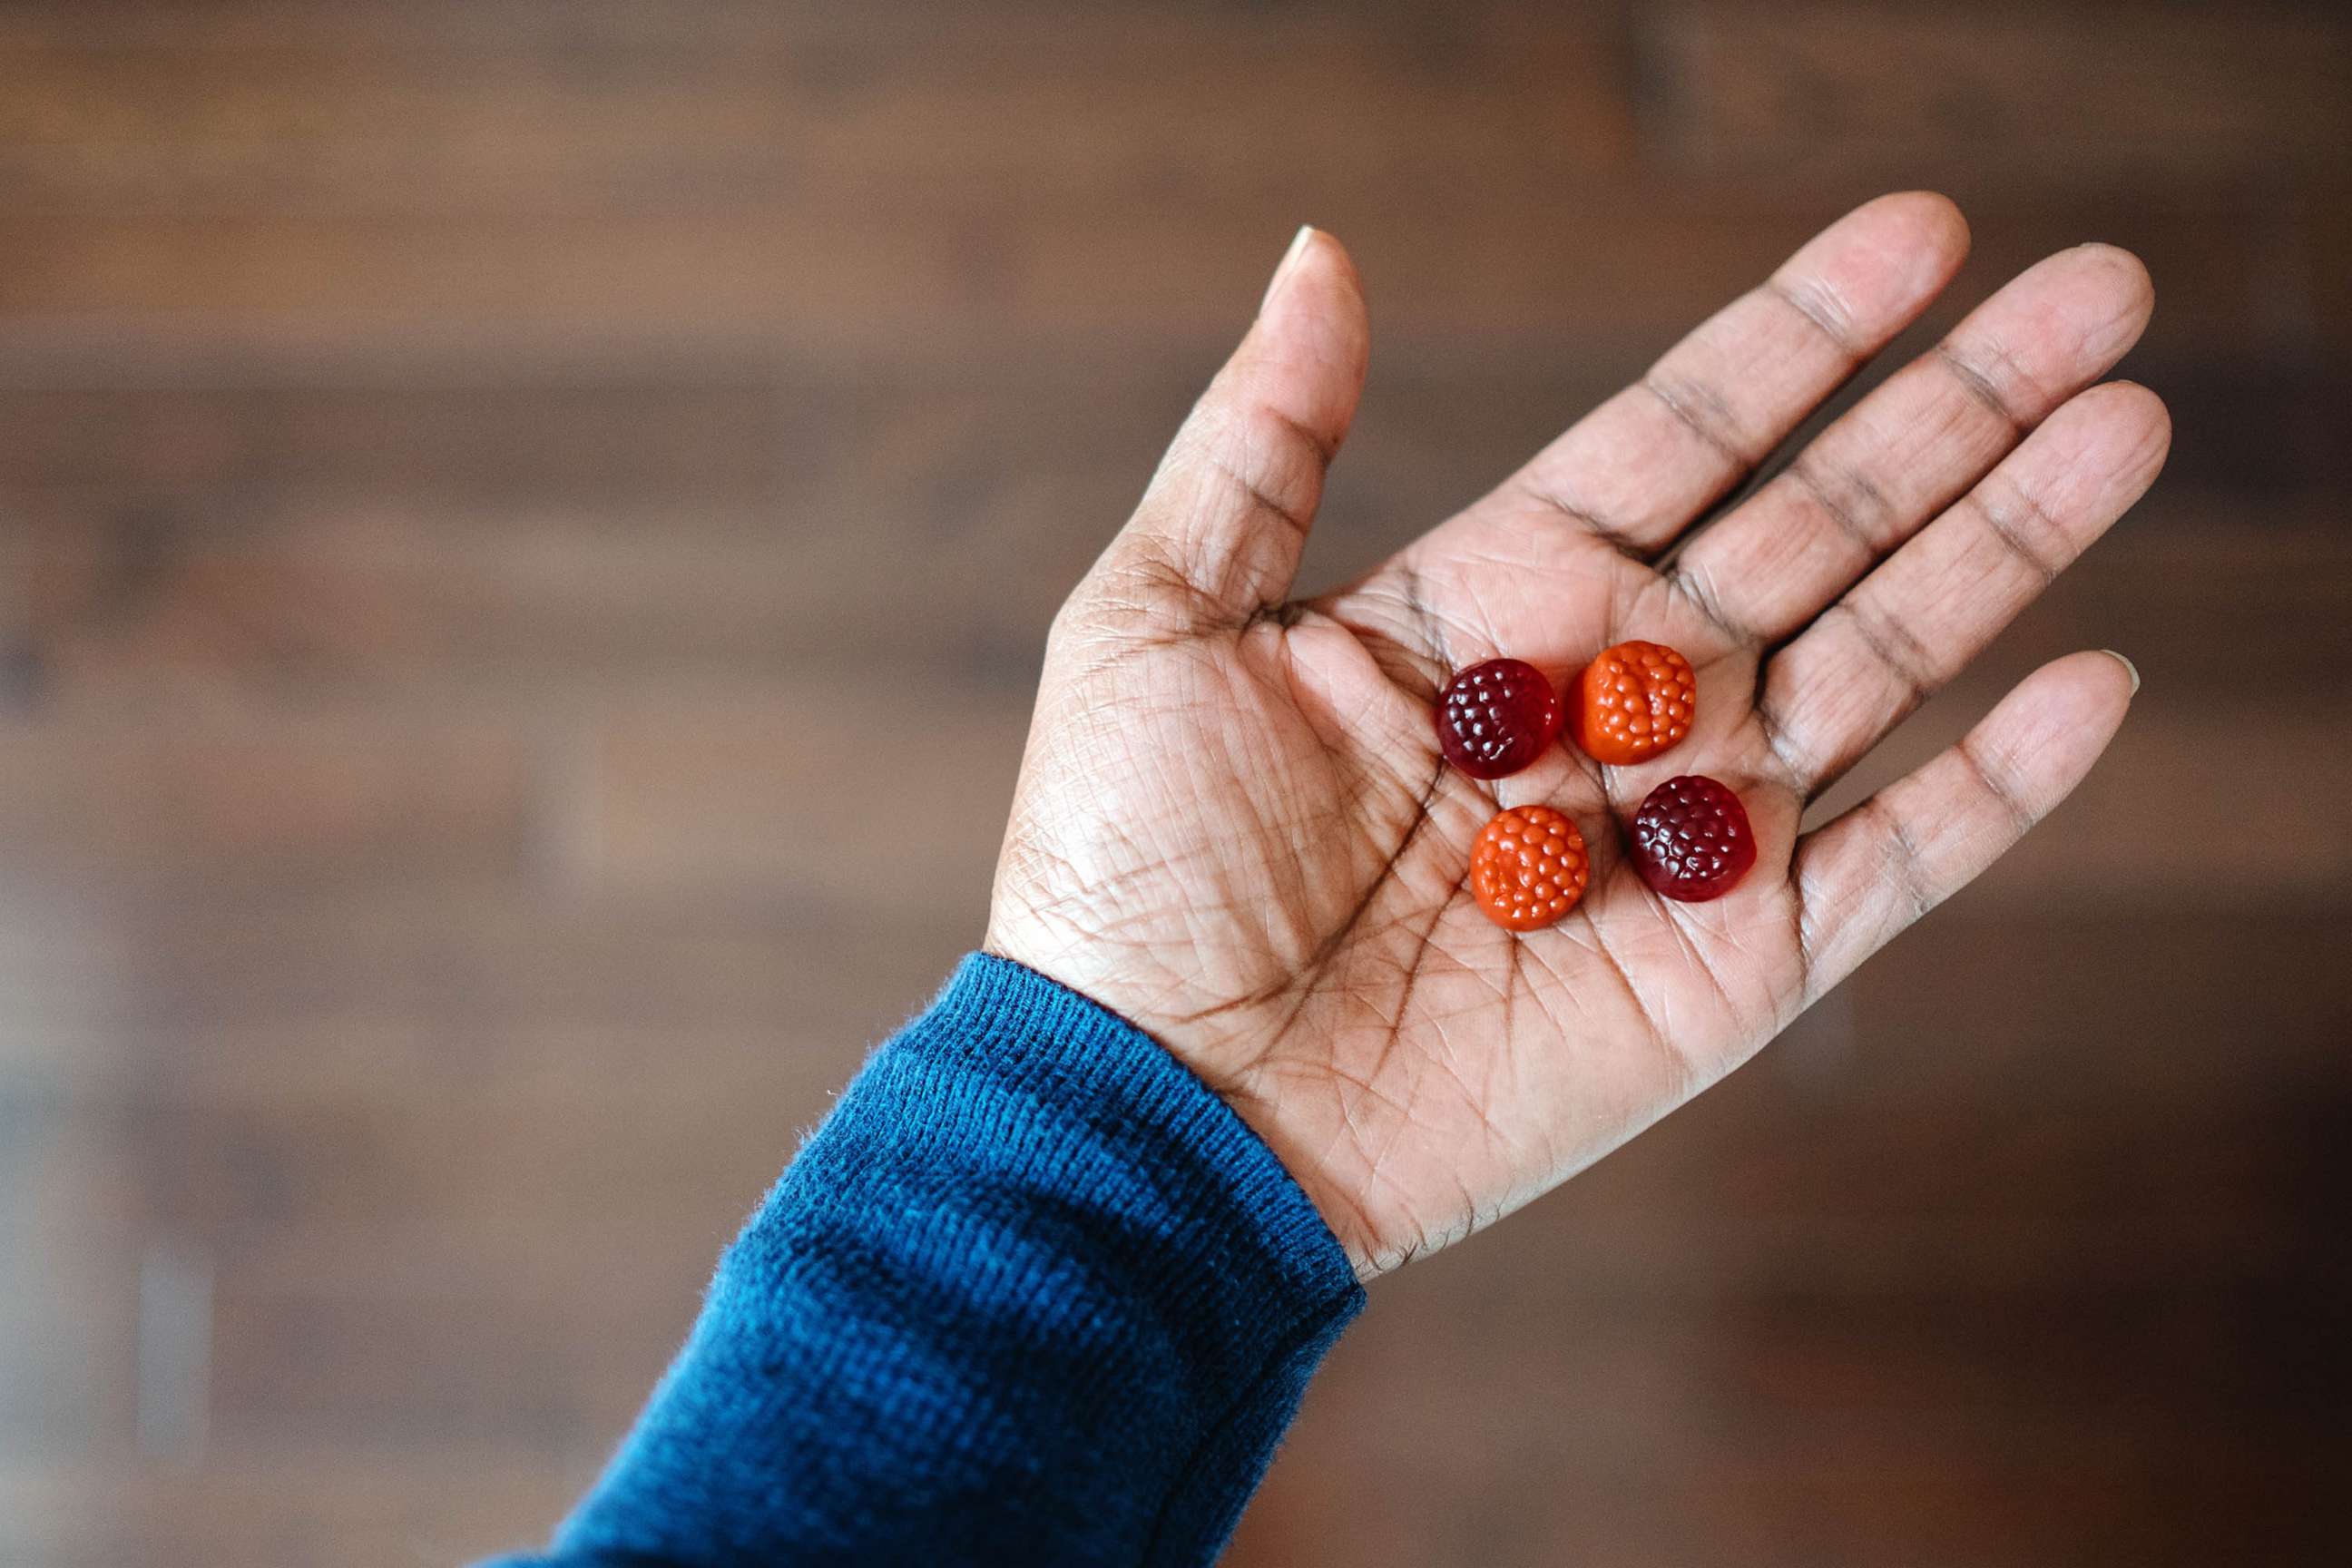 STOCK PHOTO: A woman hold four gummy supplements in the palm of her hand